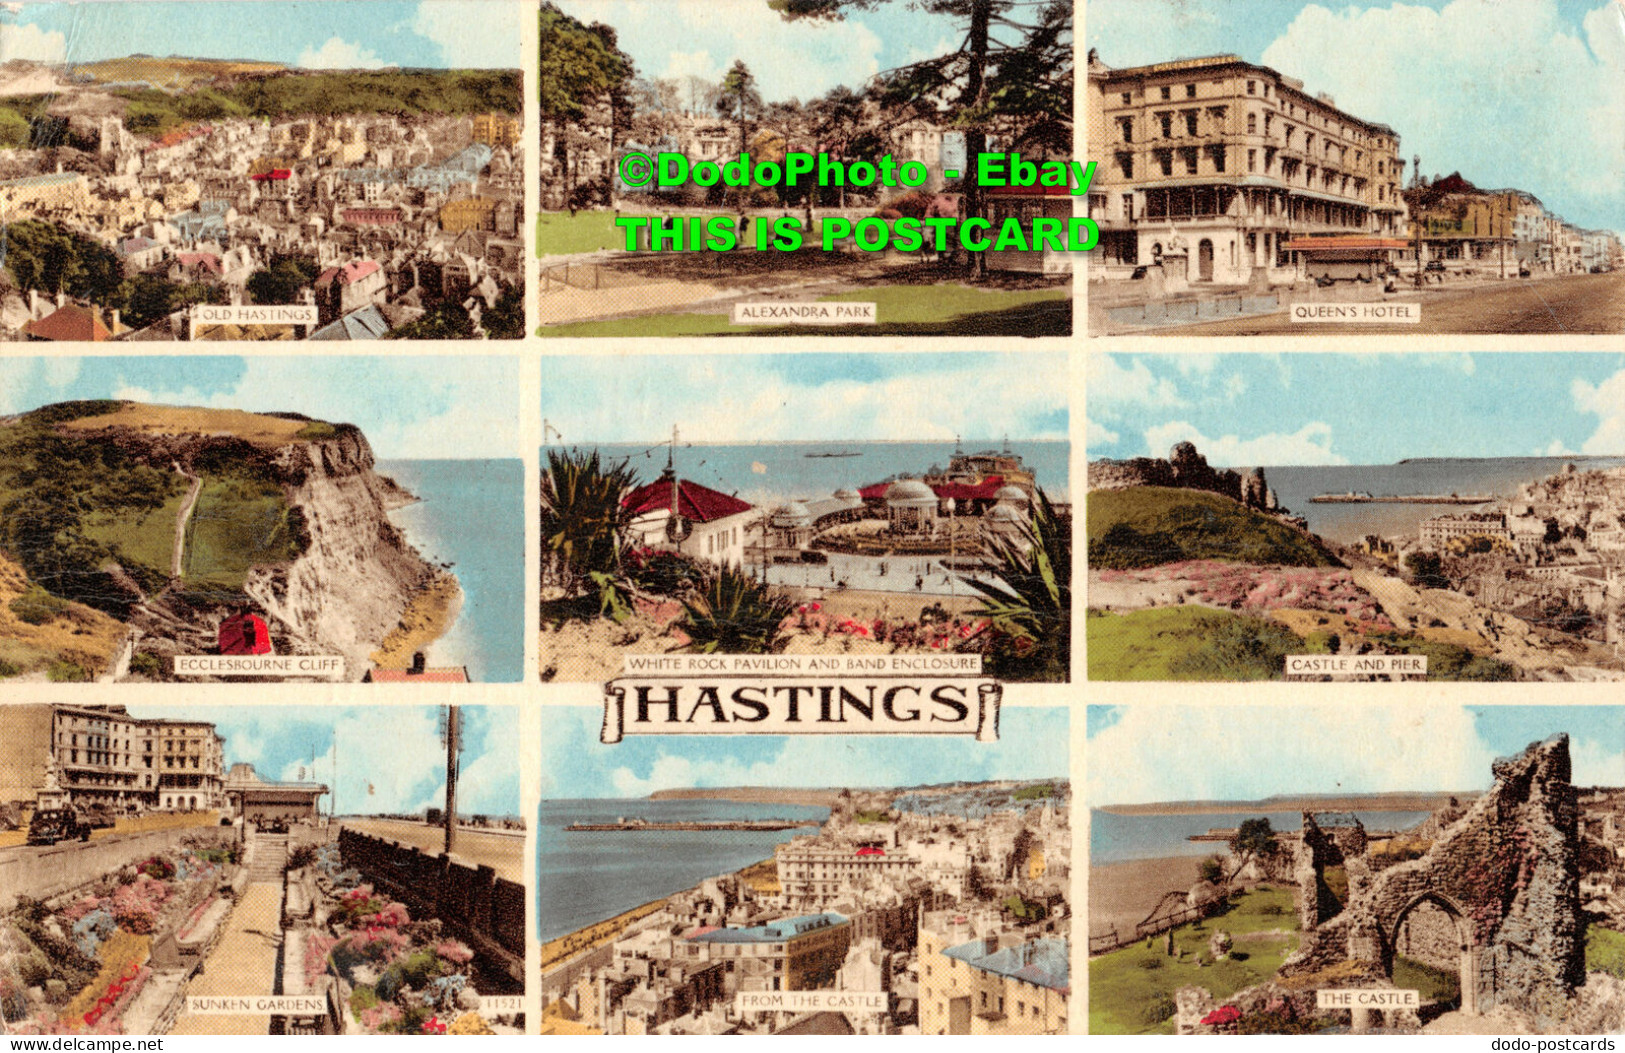 R437479 Hastings. Alexandra Park. Castle And Pier. Norman. Shoesmith And Etherid - World